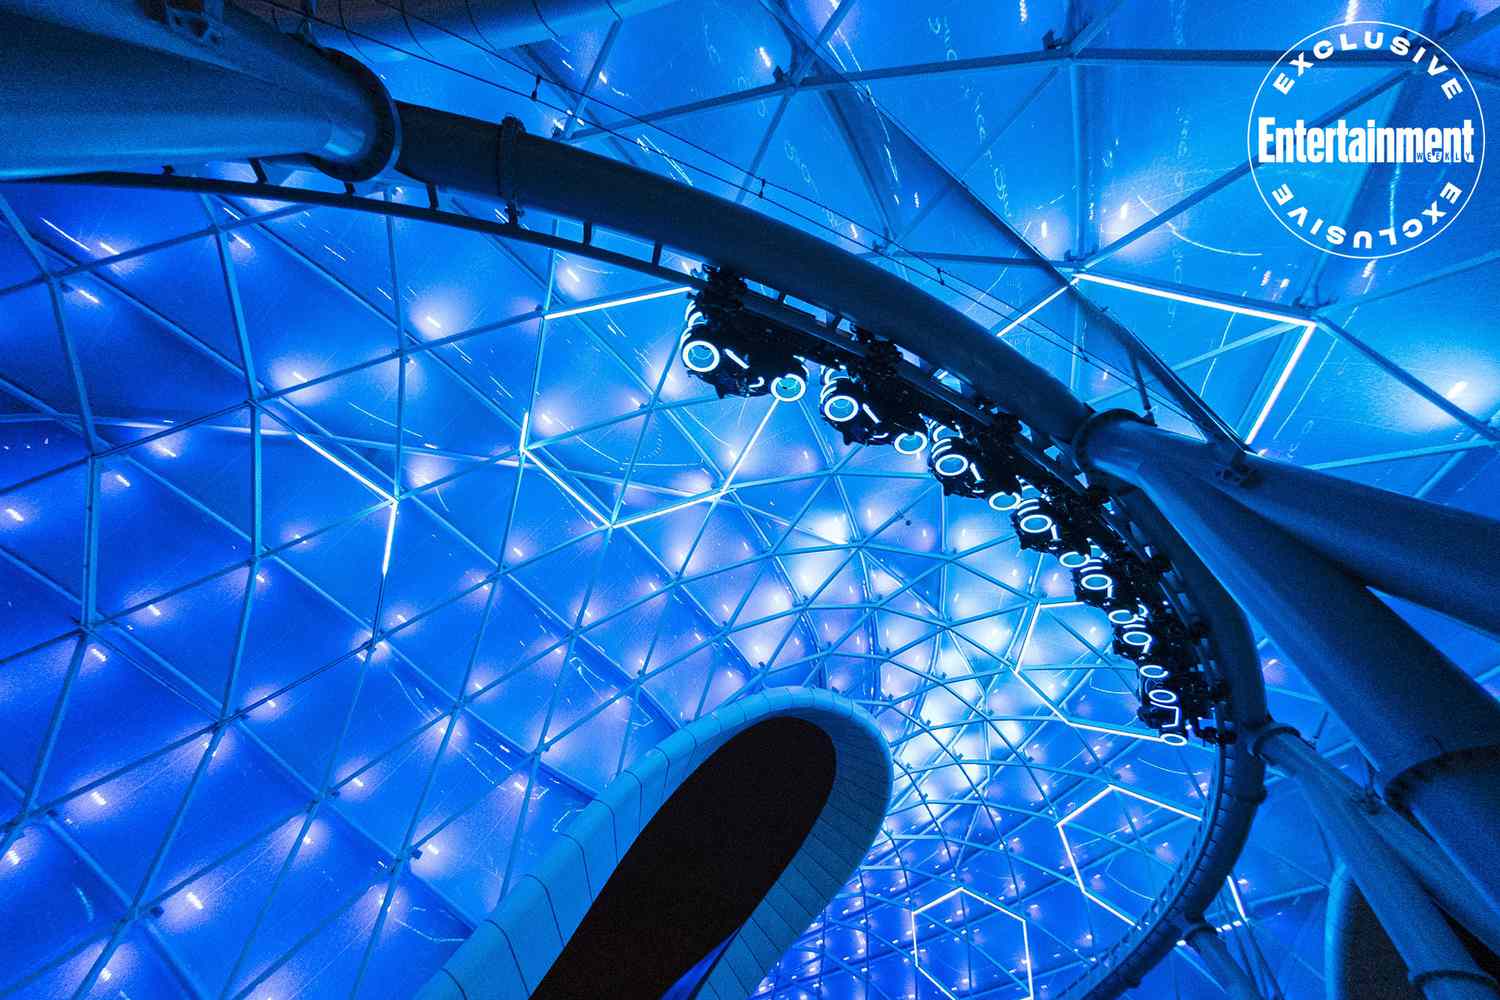 How Disney's new 'Tron' coaster opens 'next chapter' for film series